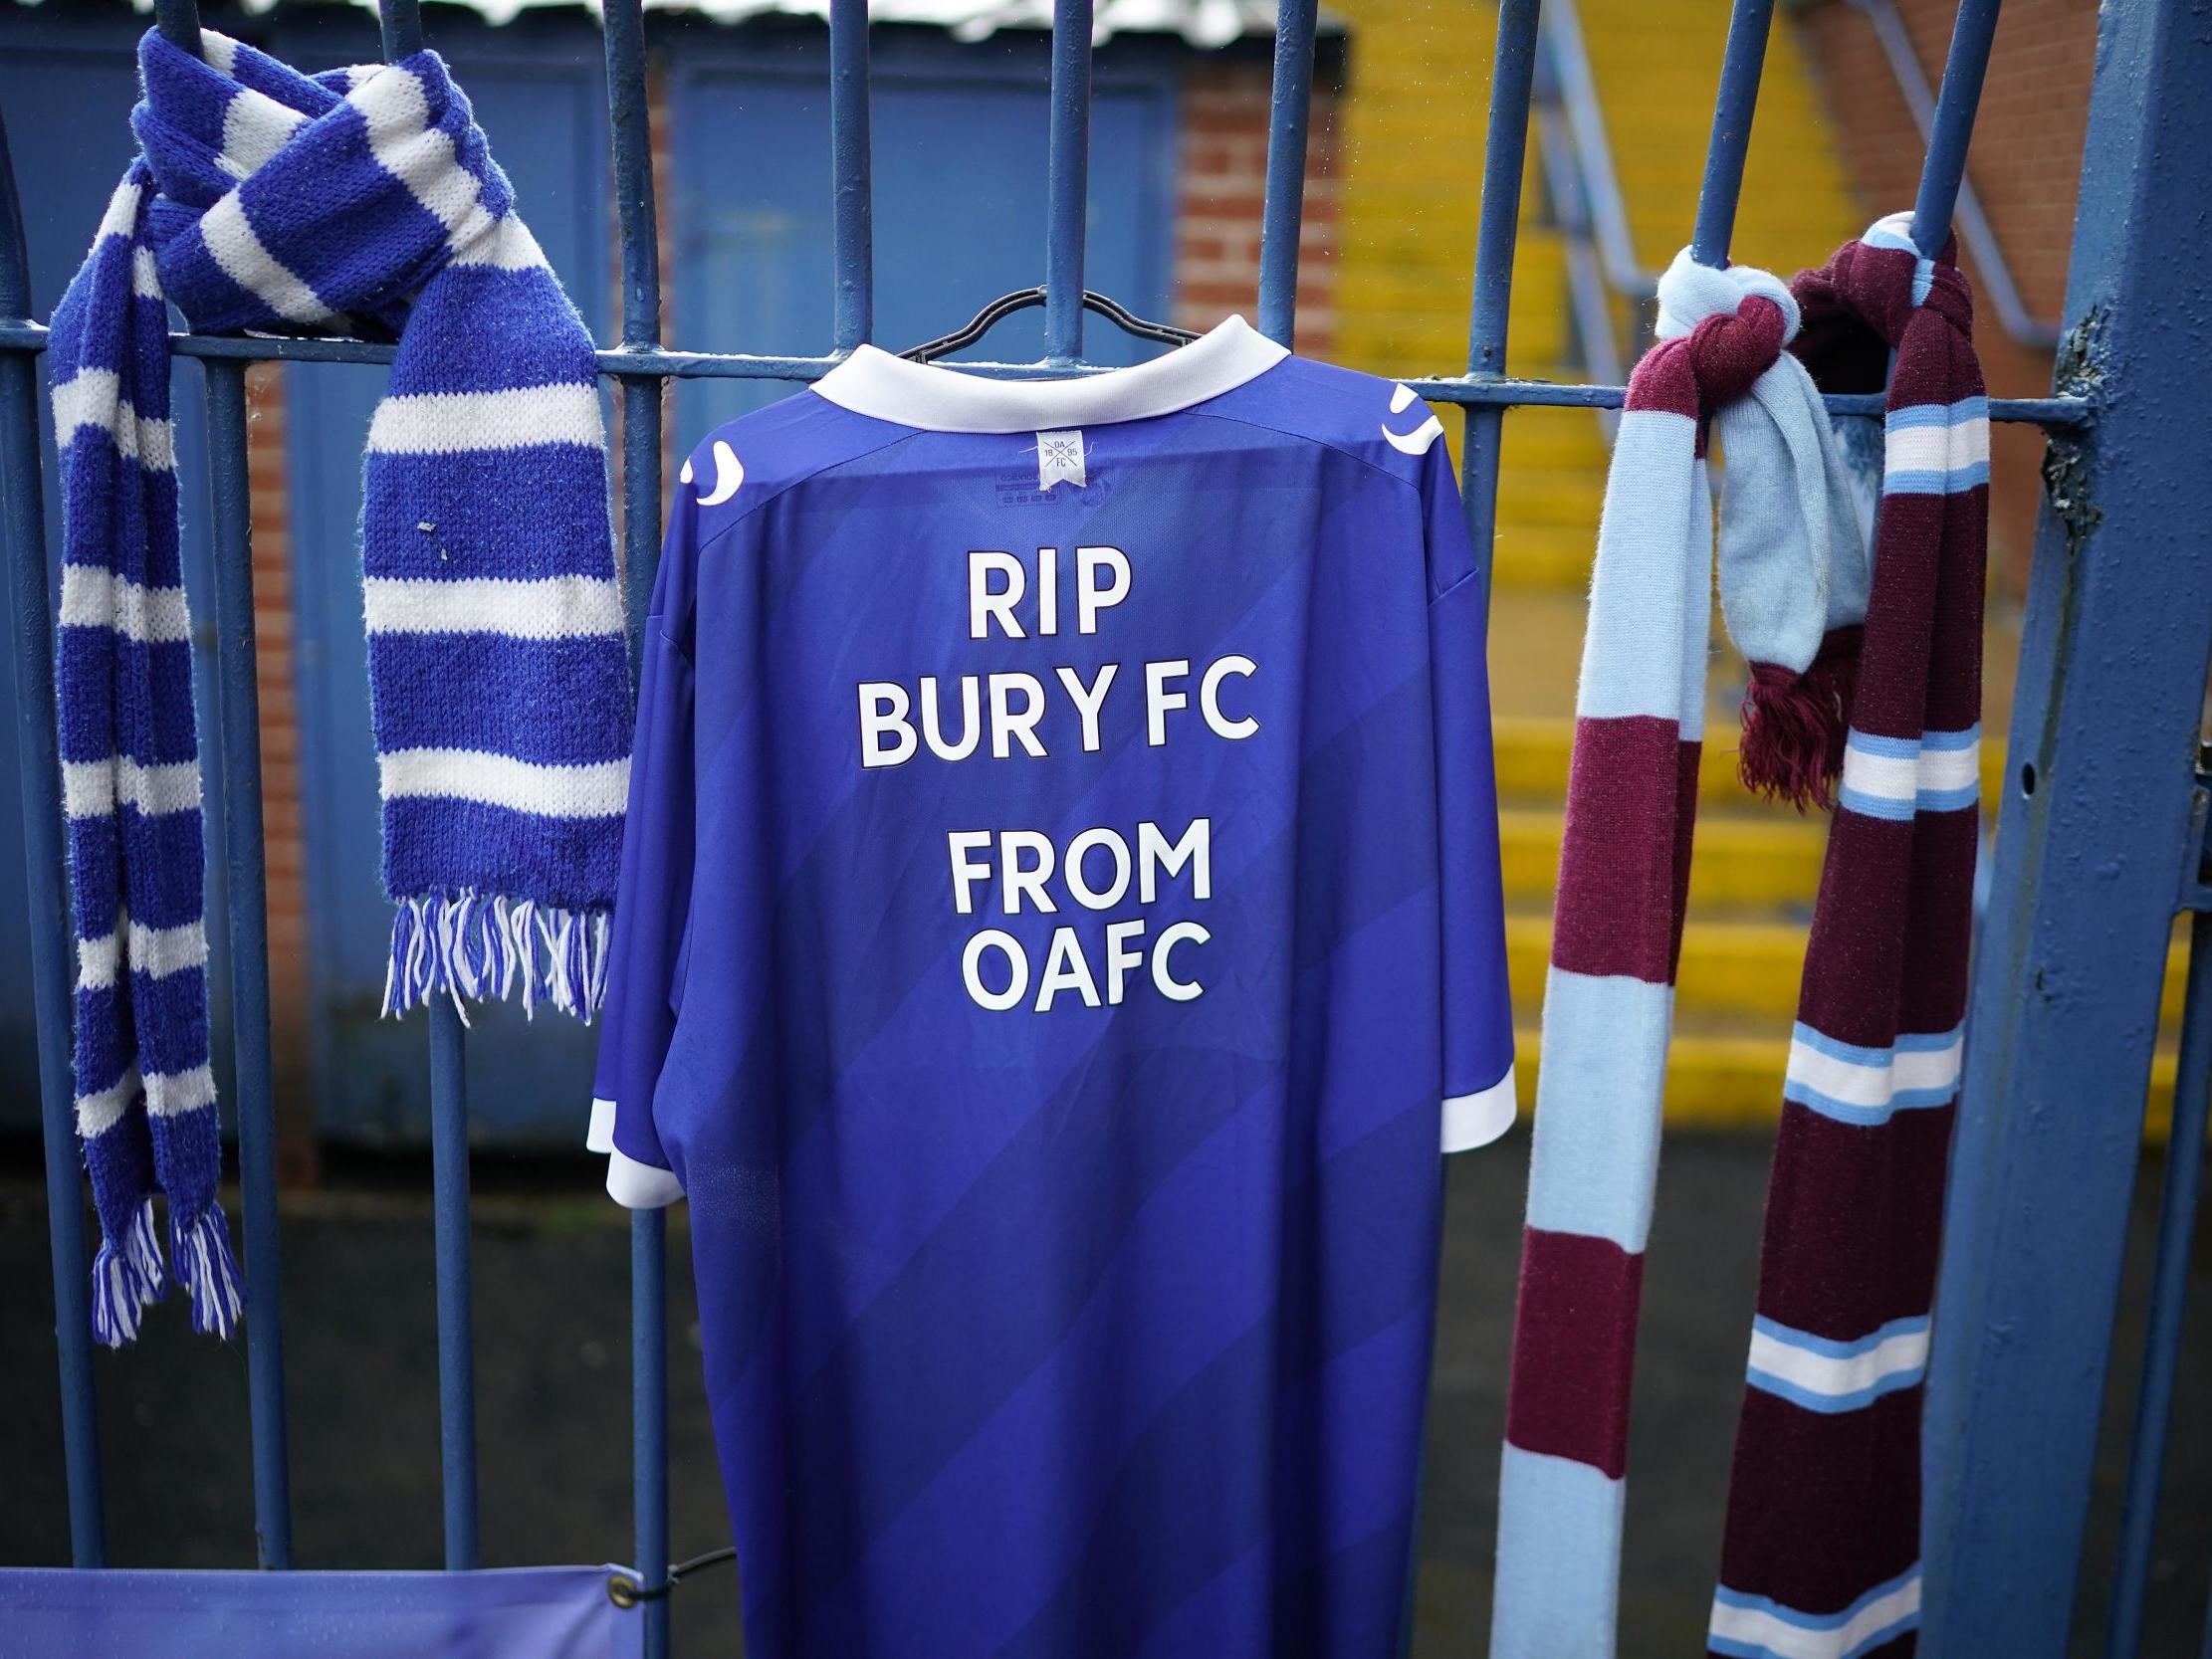 Shirts and scarves are draped outside Bury’s stadium